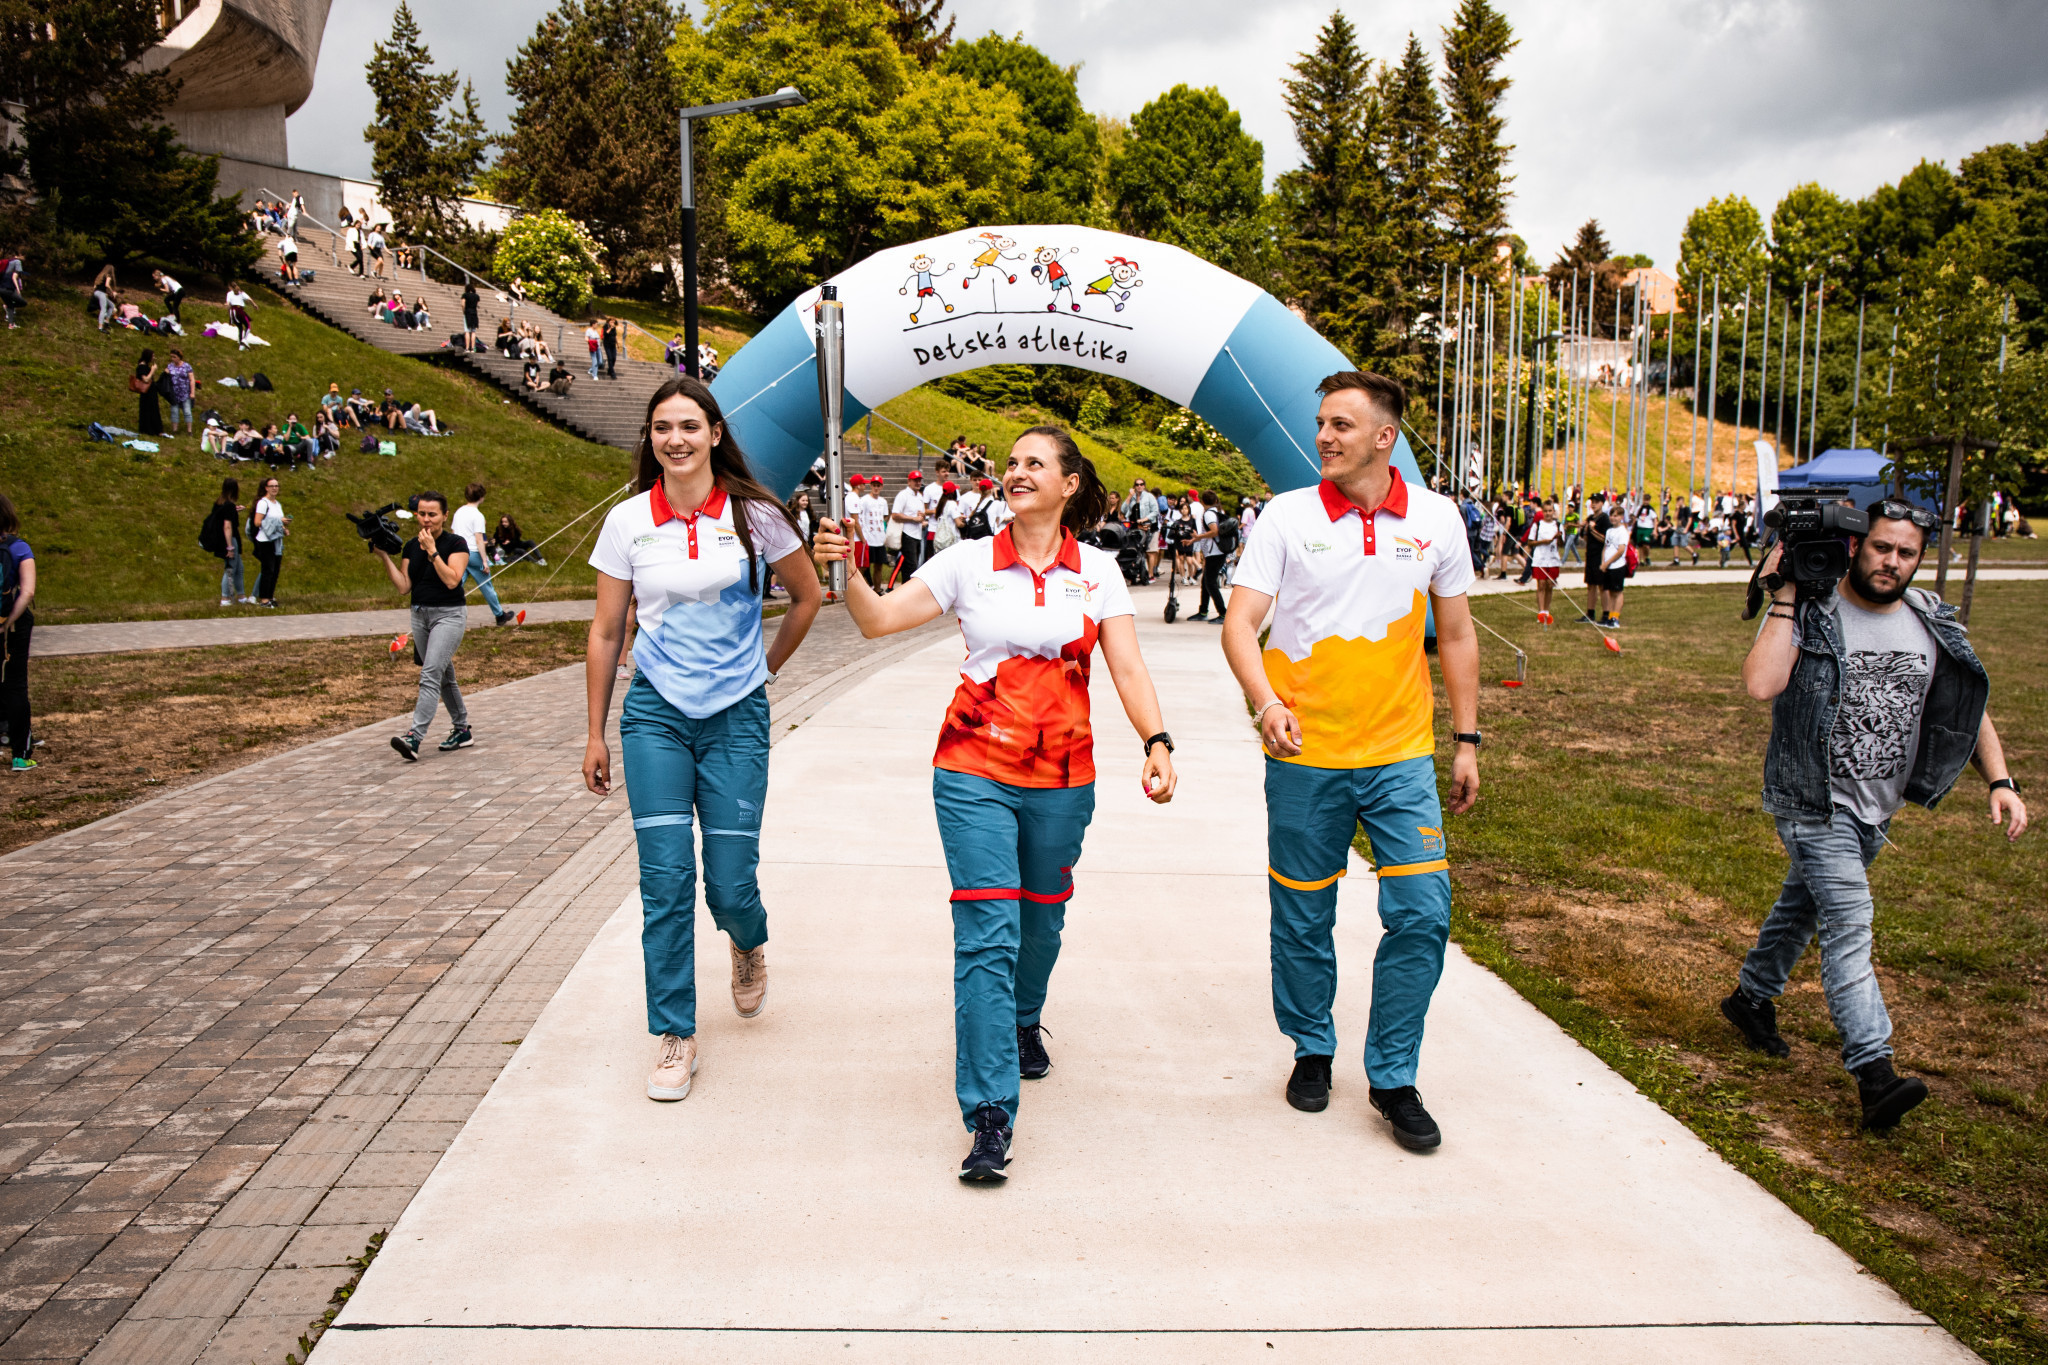 The Flame for the European Youth Olympic Festival has begun its journey around Slovakia in the build-up to the event ©EYOF 2022